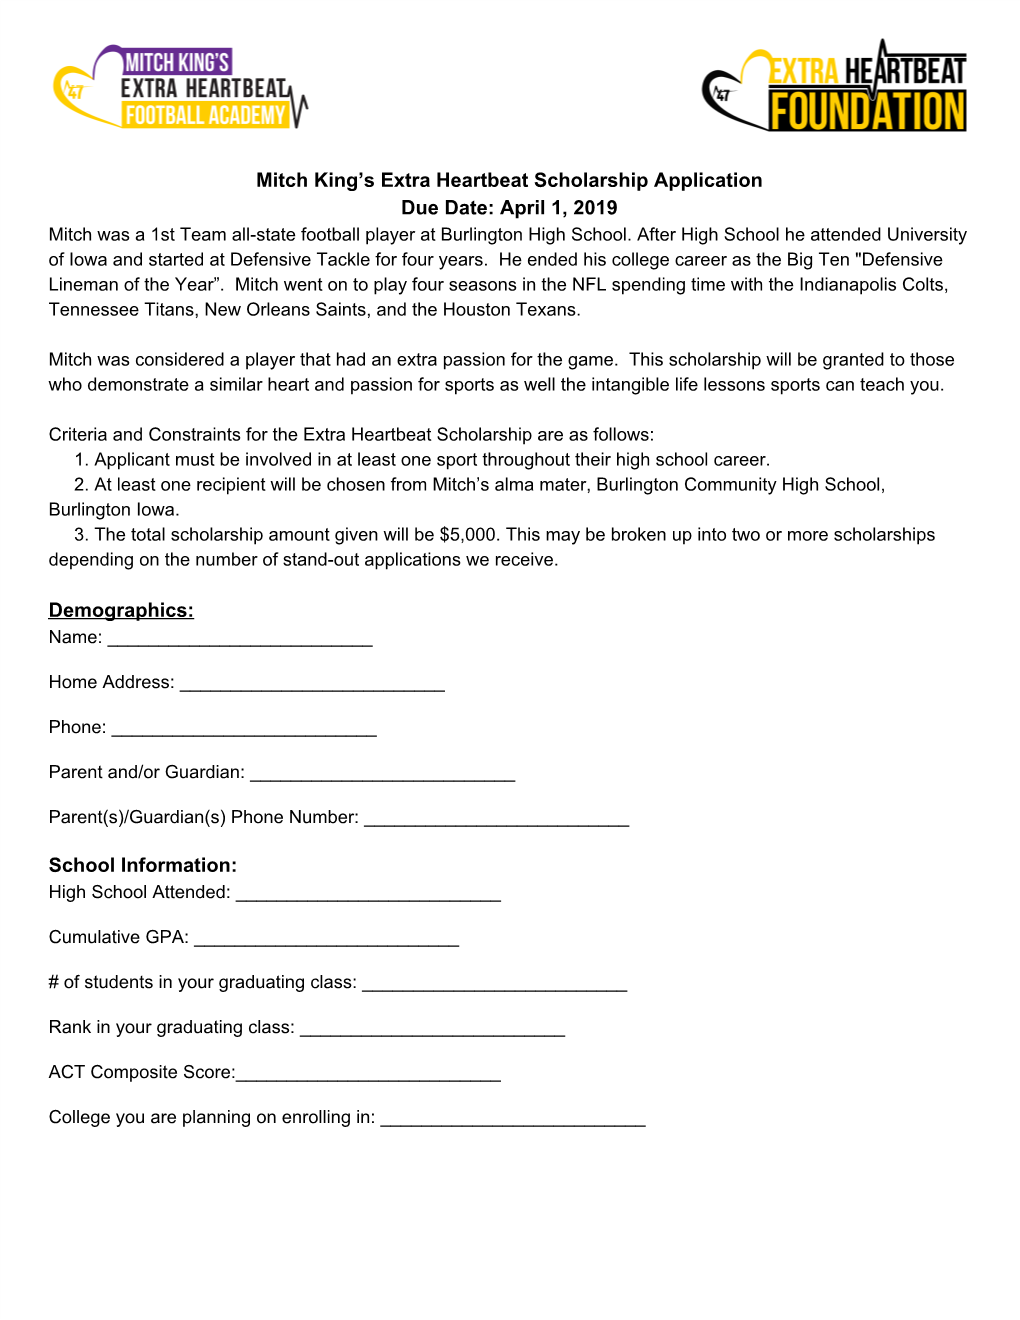 Mitch King's Extra Heartbeat Scholarship Application Due Date: April 1, 2019 Demographics: School Information